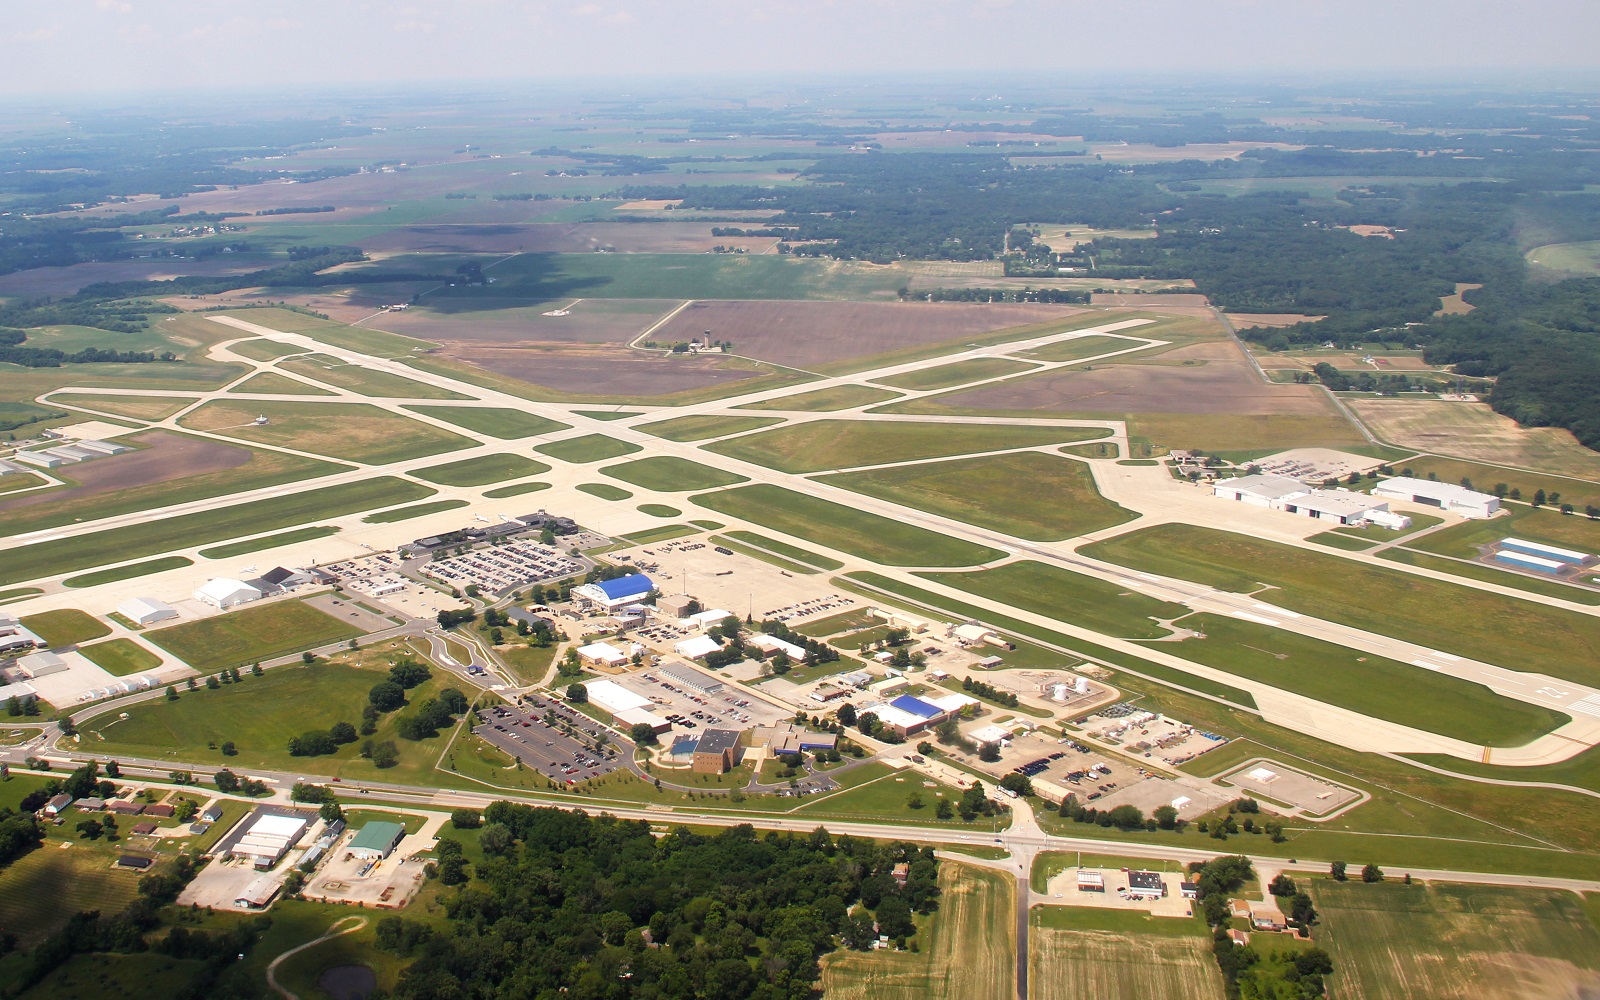 Abraham Lincoln Capital Airport